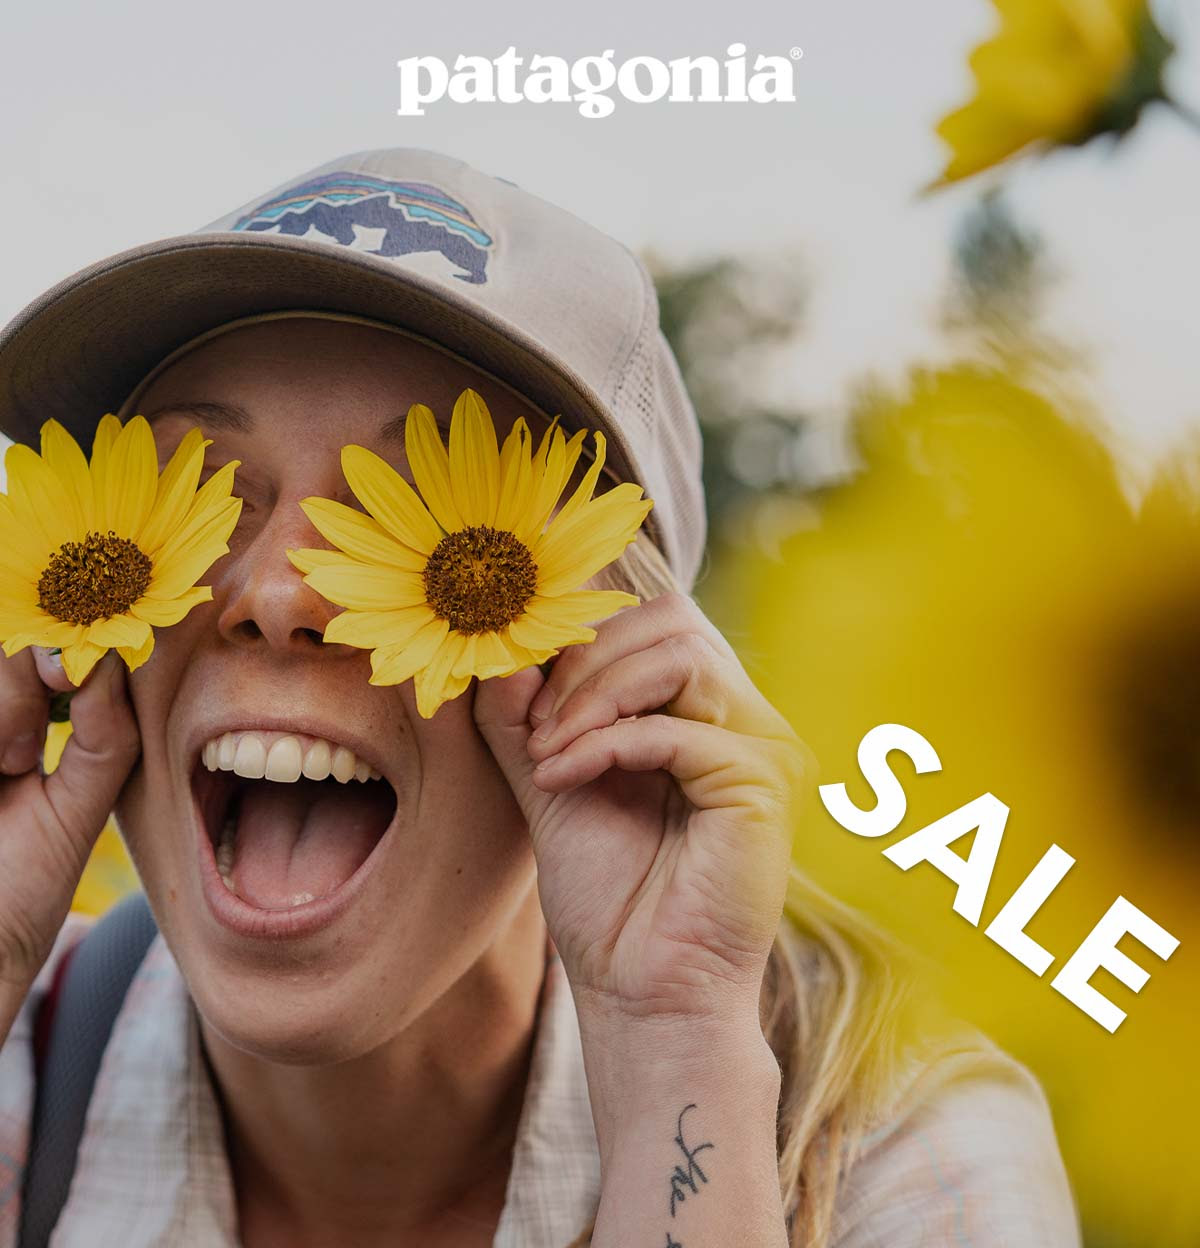 Sale. A person holds two yellow flowers over their eyes while smiling broadly.